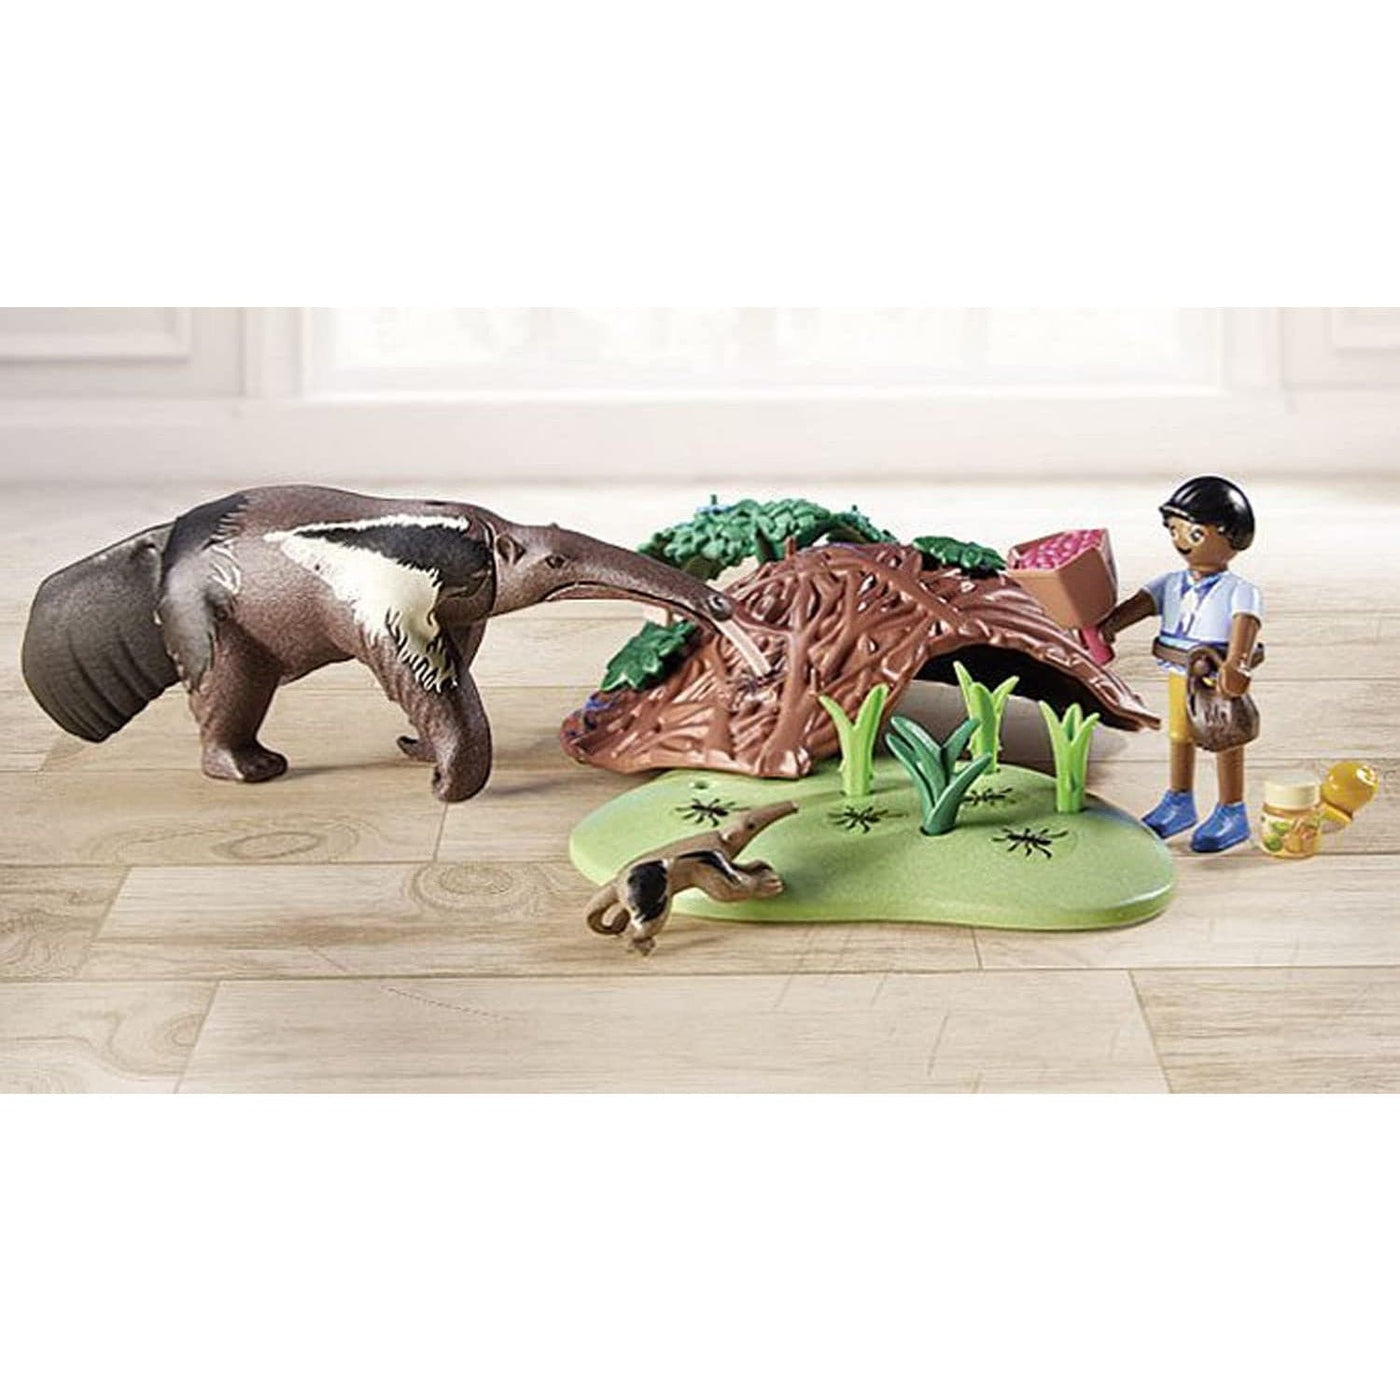 Wiltopia - Discover the Planet Anteater-Toy Playsets-Playmobil-Yes Bebe